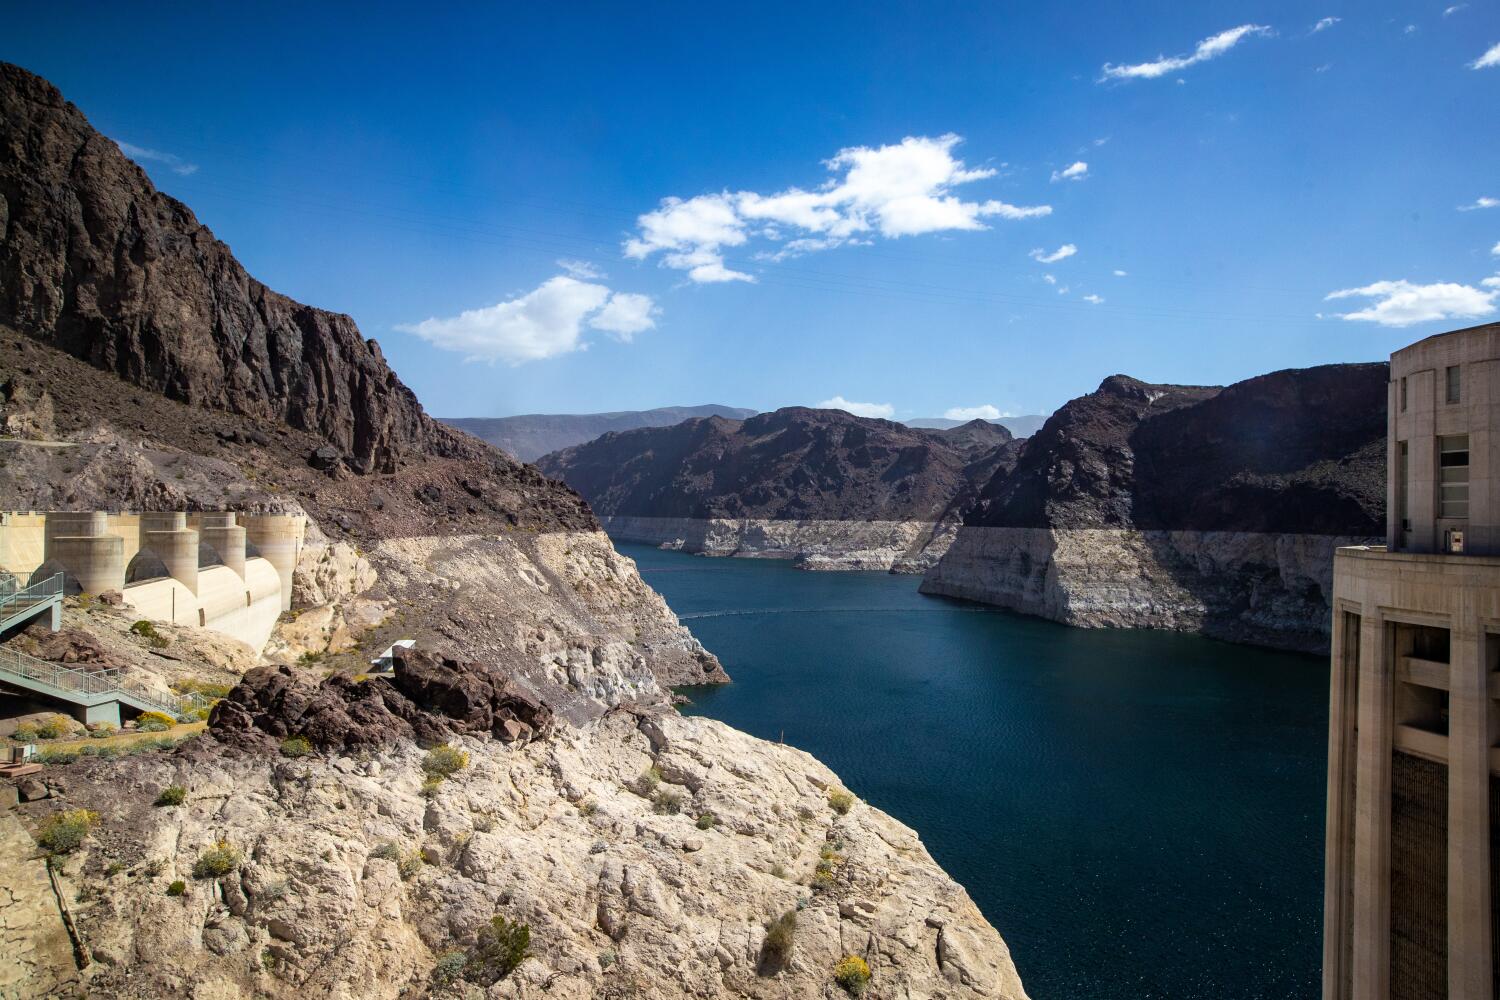 Feds say Colorado River water cuts are sufficient to stave off immediate risks 